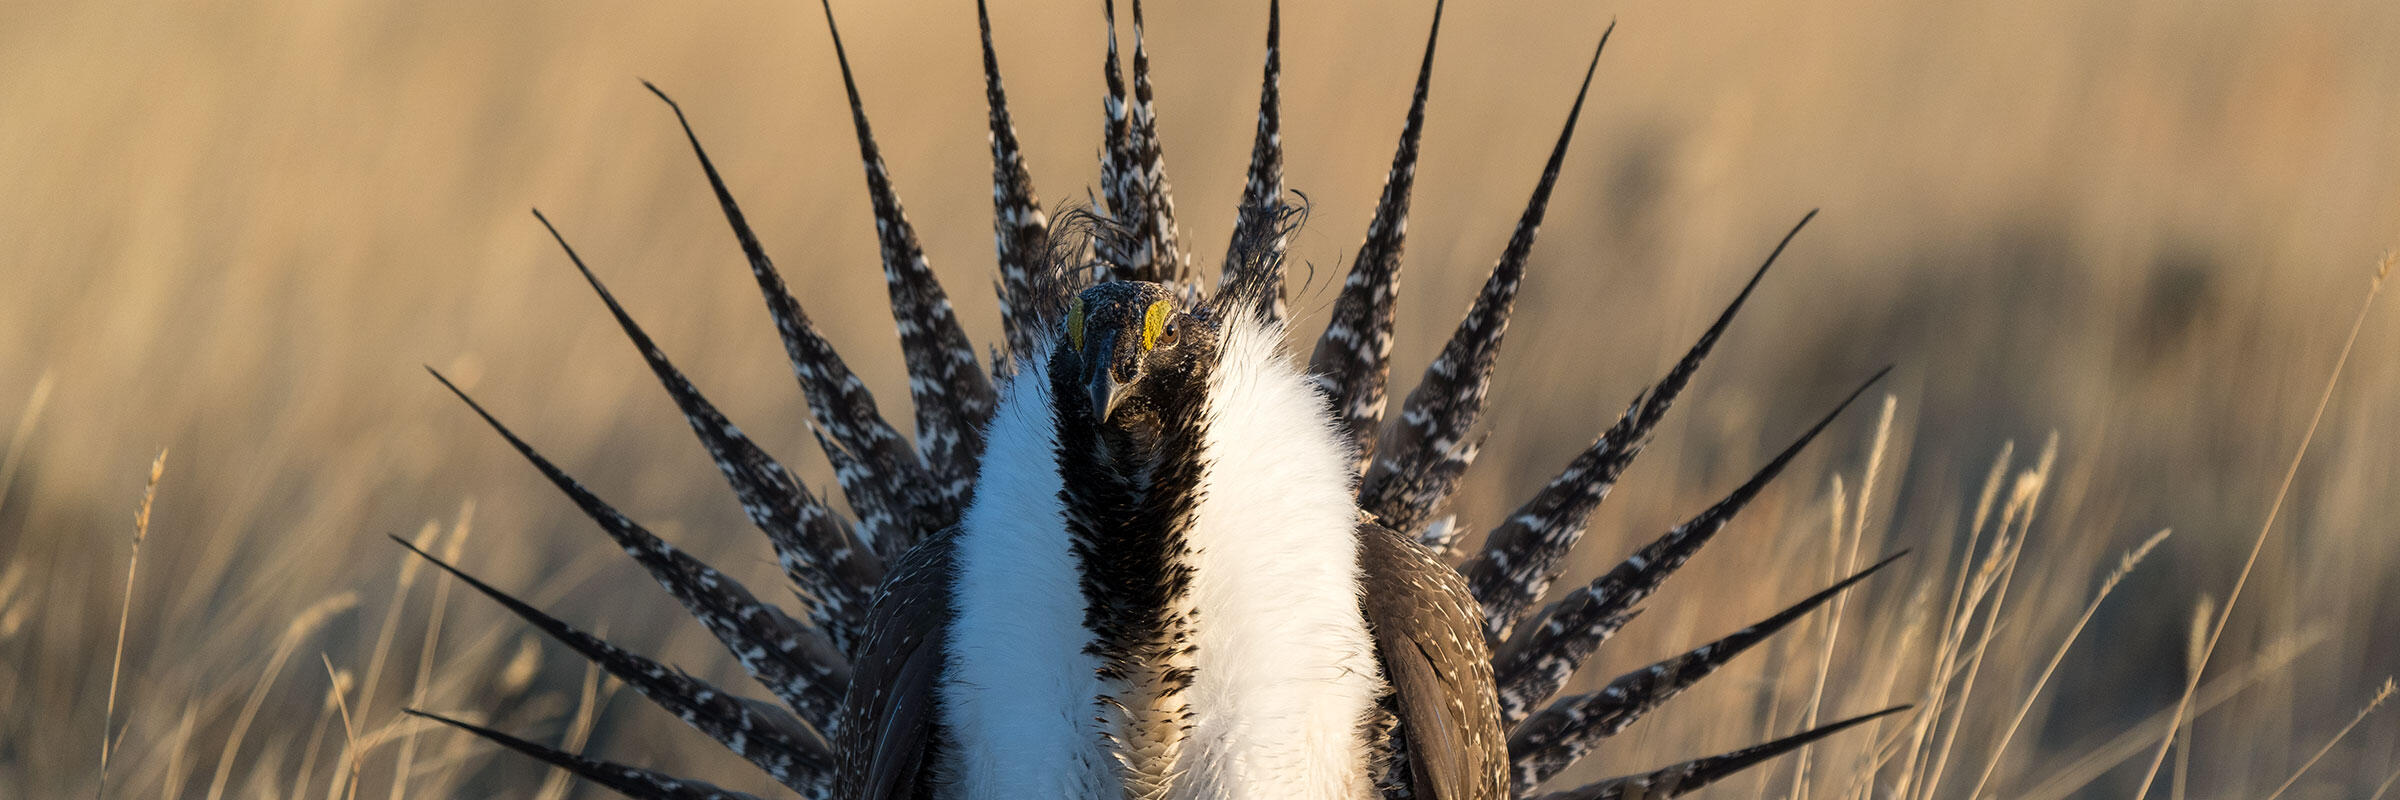 A Greater Sage-Grouse performing a courtship display.